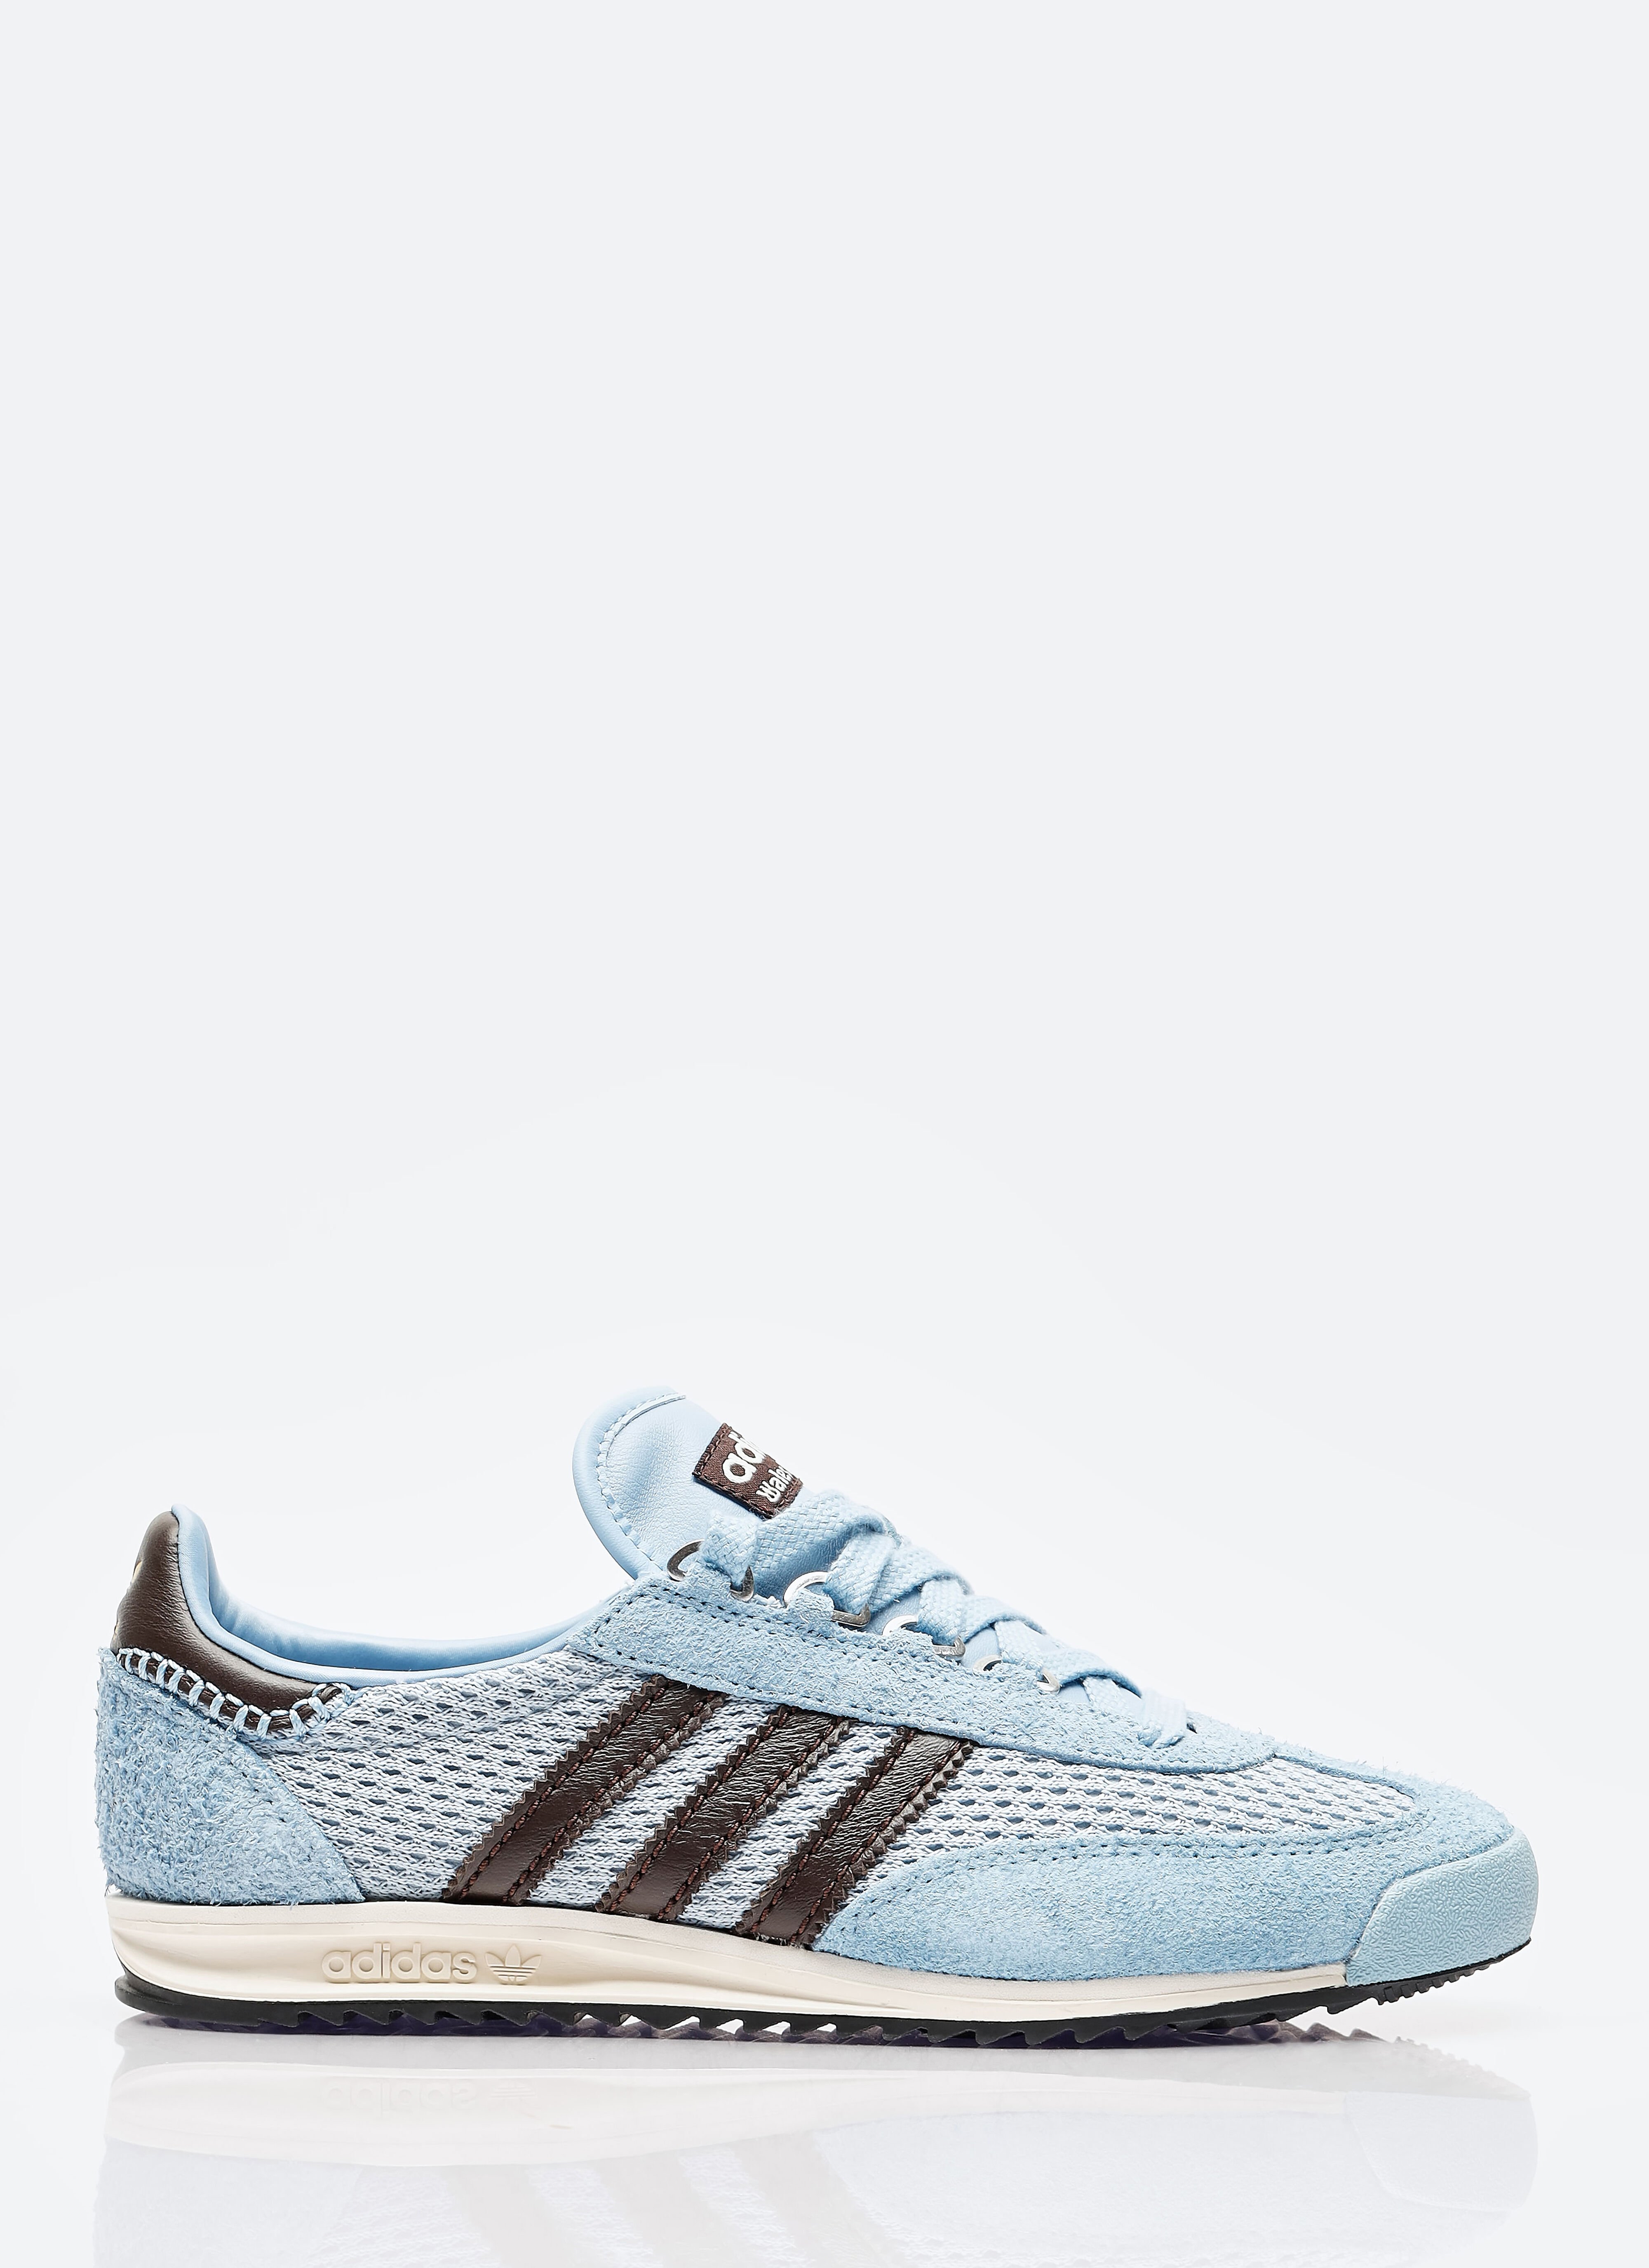 adidas by Wales Bonner SL76 Sneakers Blue awb0357015